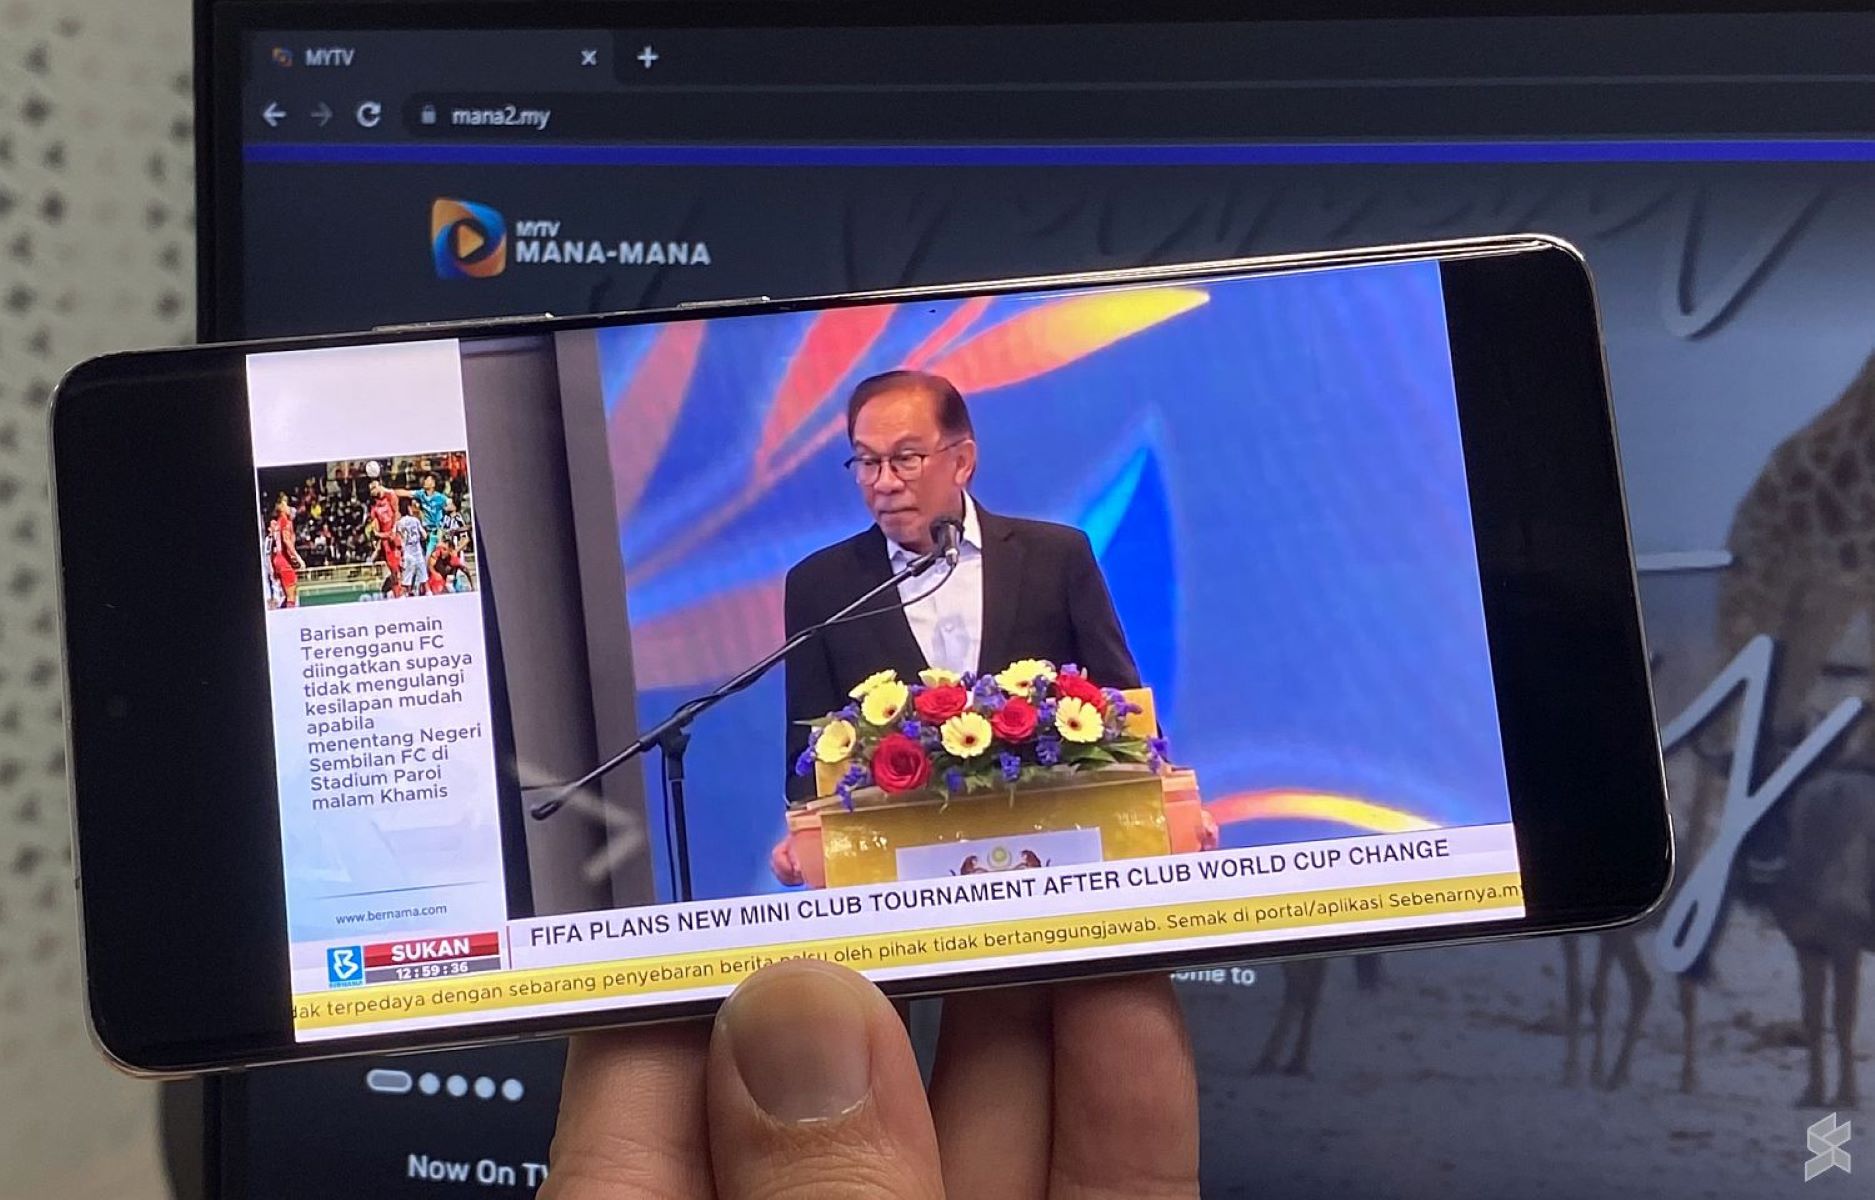 How To Watch Live TV On Mobile For Free